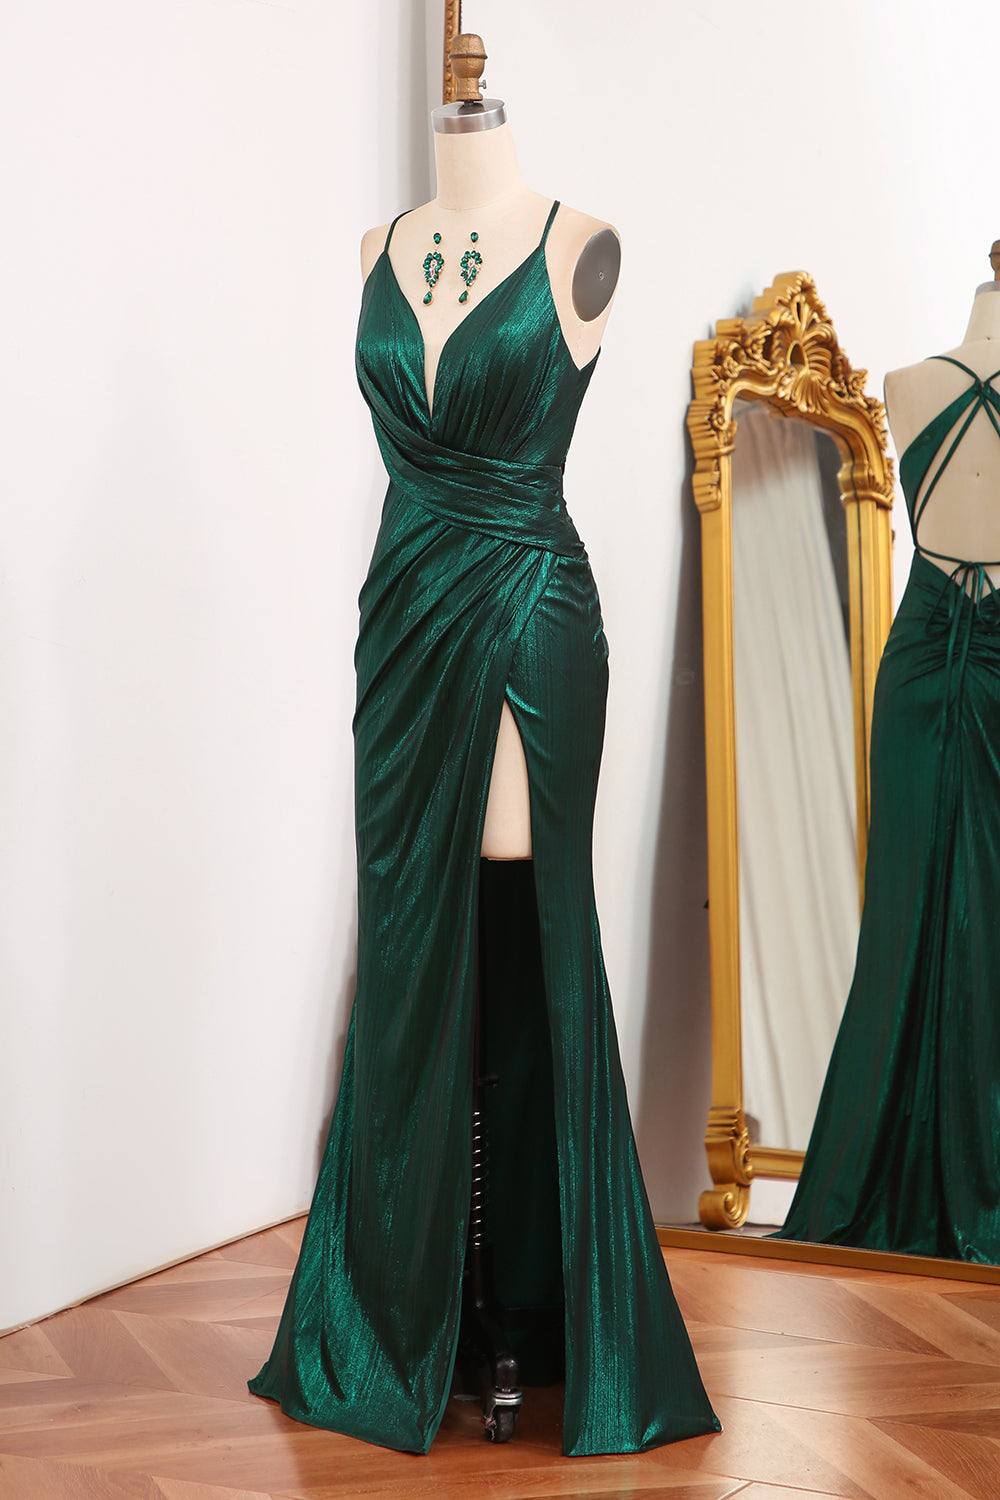 Dark Green Mermaid Spaghetti Straps Keyhole Long Corset Prom Dress With Slit Gowns, Formal Dresses Long Sleeved